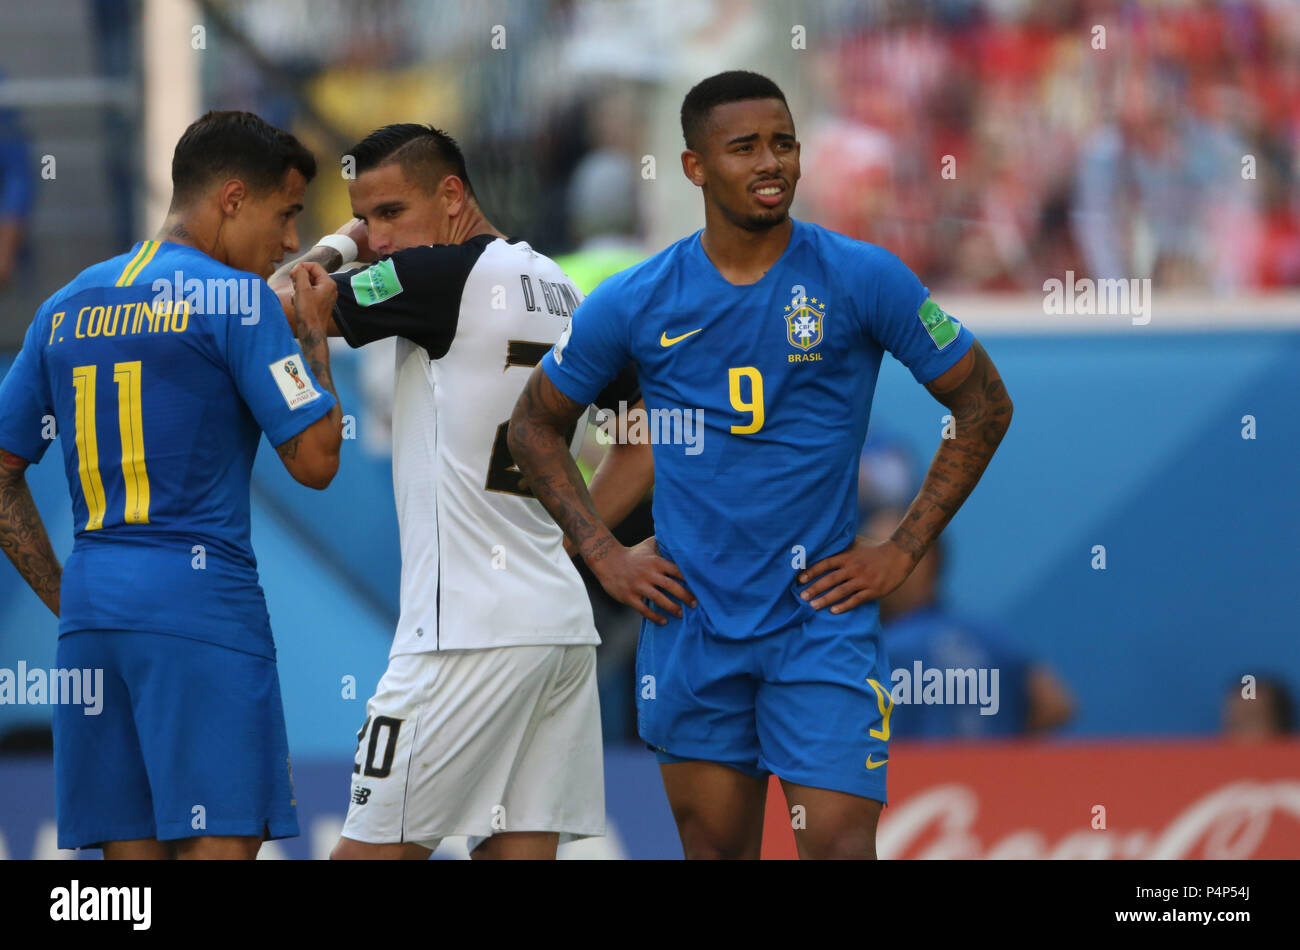 Saint Petersburg, Russia. 22nd June 2018.  GABRIEL JESUS in action during the Fifa World Cup Russia 2018, Group E, football match between BRAZIL V COSTARICA  in Saint Petersburg Stadium. Credit: marco iacobucci/Alamy Live News Stock Photo